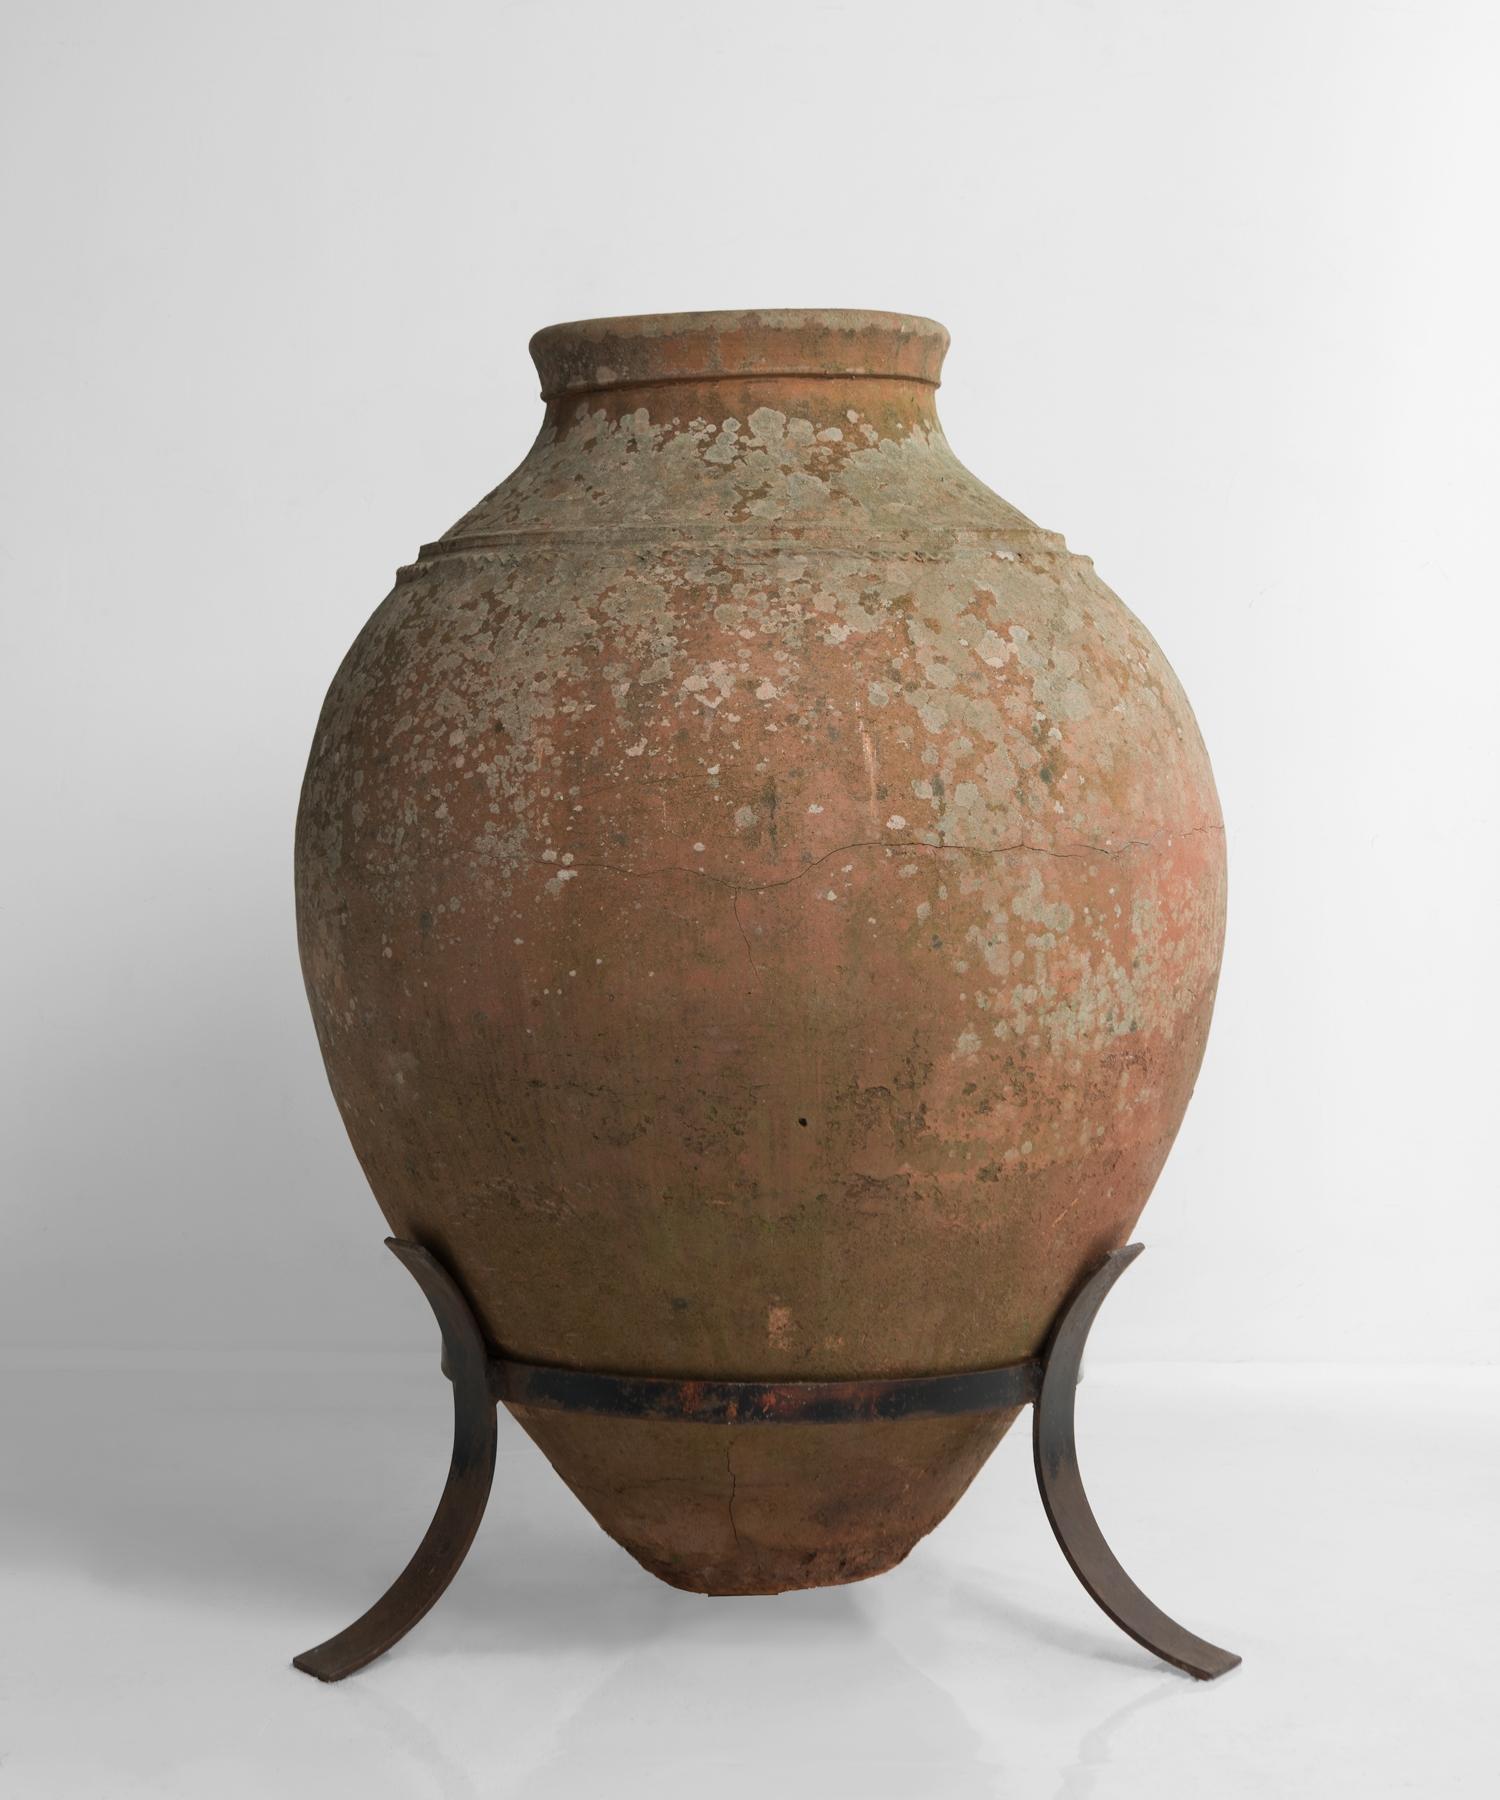 Massive olive oil jar on metal stand, Italy, circa 1910.

Exquisite, large form with wonderful patina that sits in a metal stand.